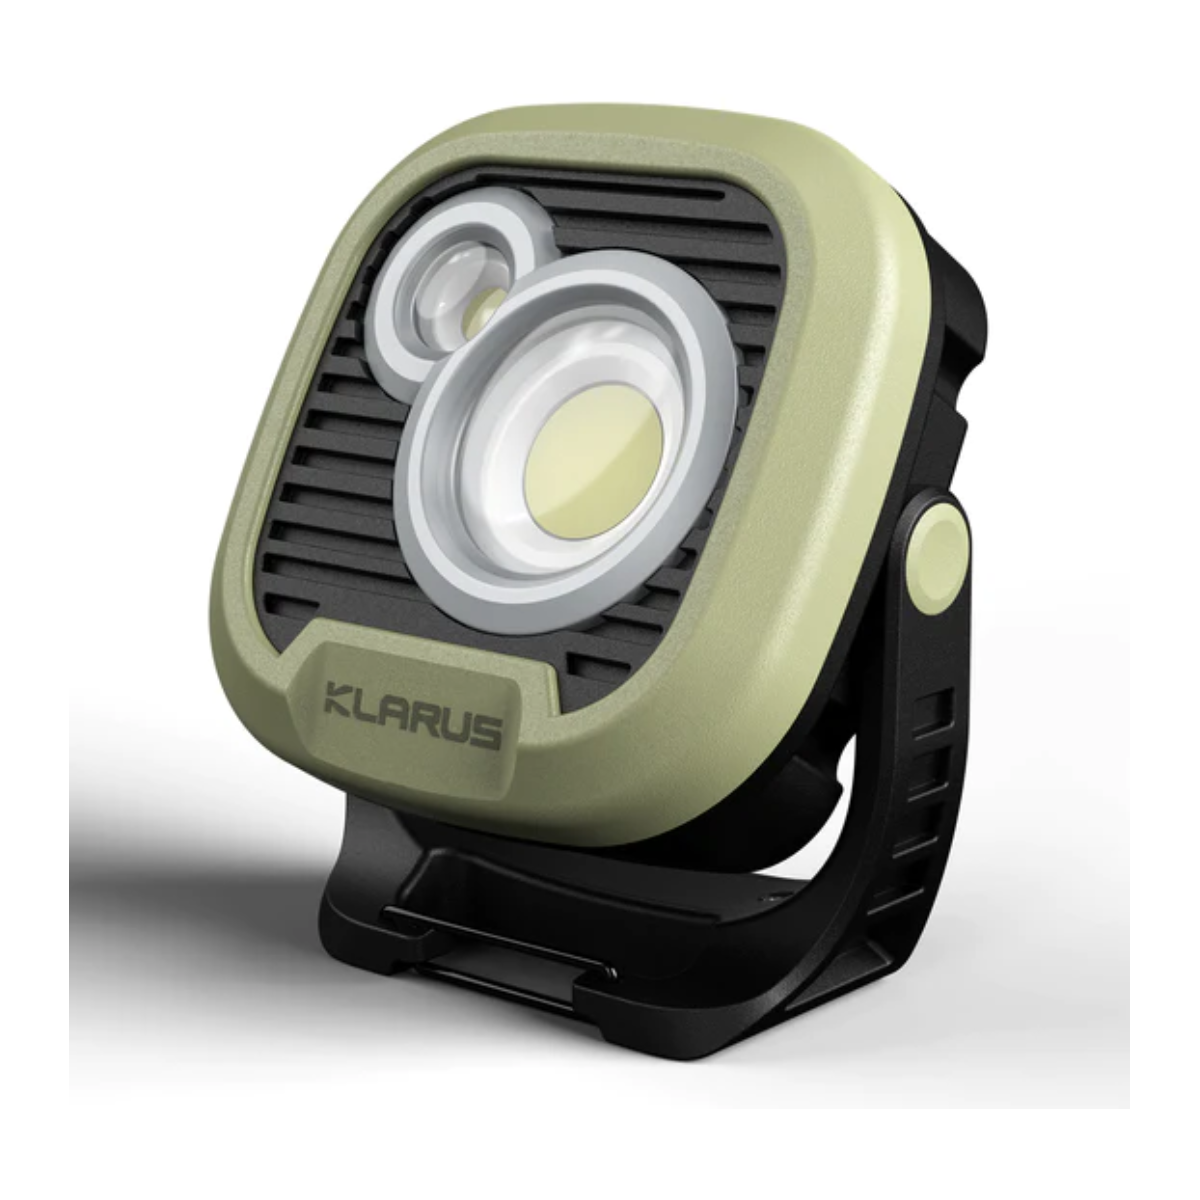 KLARUS WL3 1500LM CAMPING RECHARGEABLE WORK LIGHT